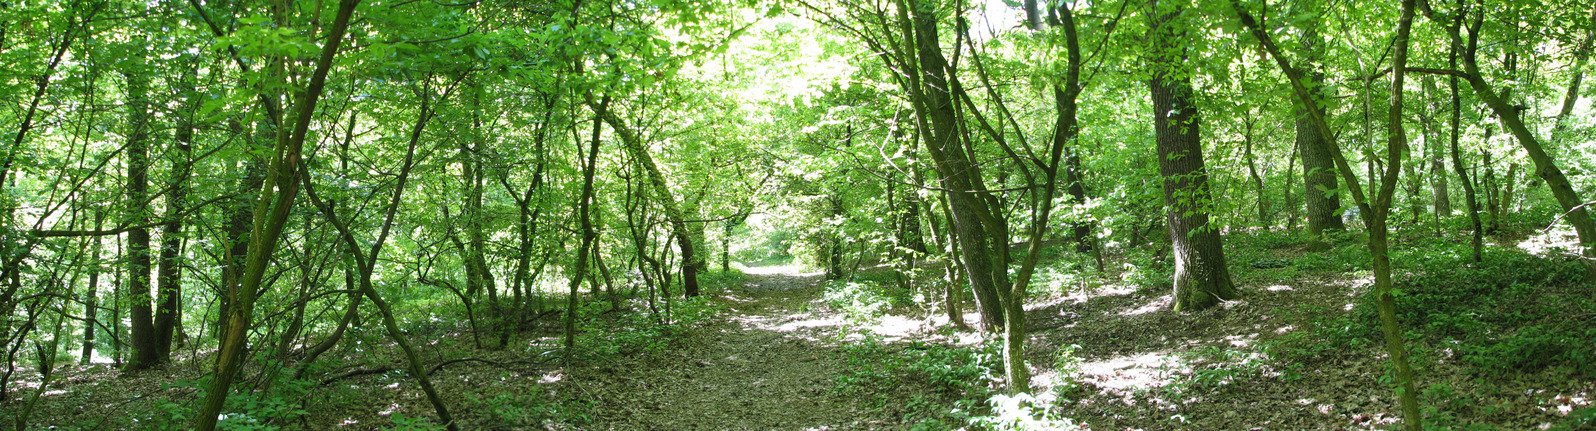 the trees are full of green leaves along a trail